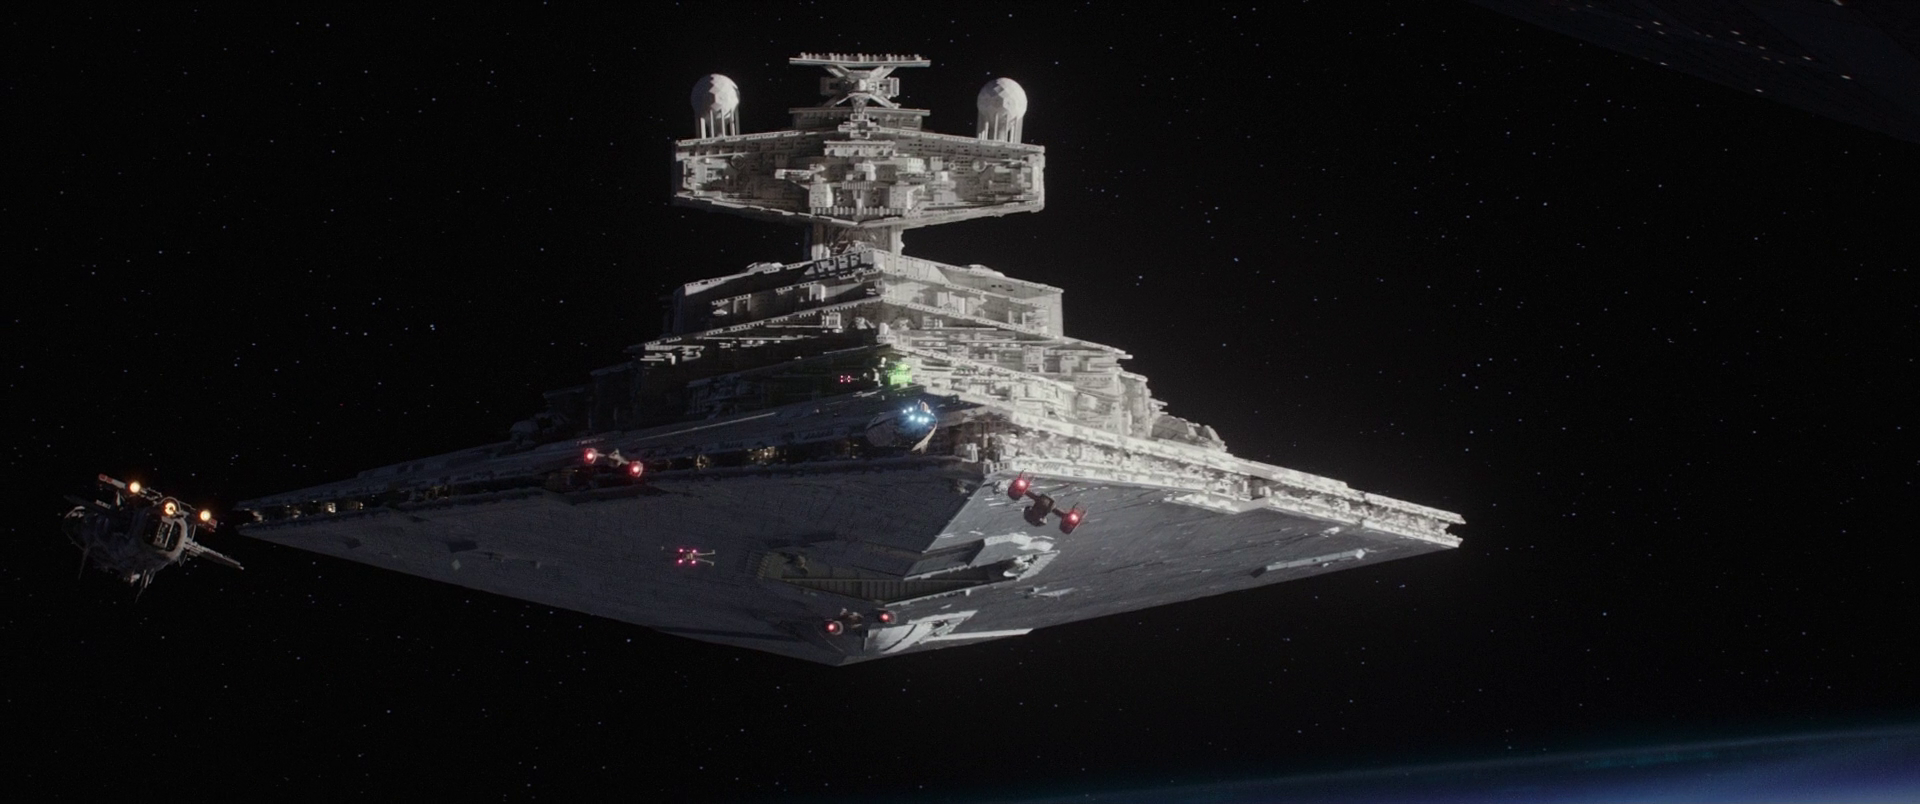 General 1920x804 Star Wars Star Destroyer Rogue One: A Star Wars Story spaceship Imperial Forces movies science fiction Star Wars Ships